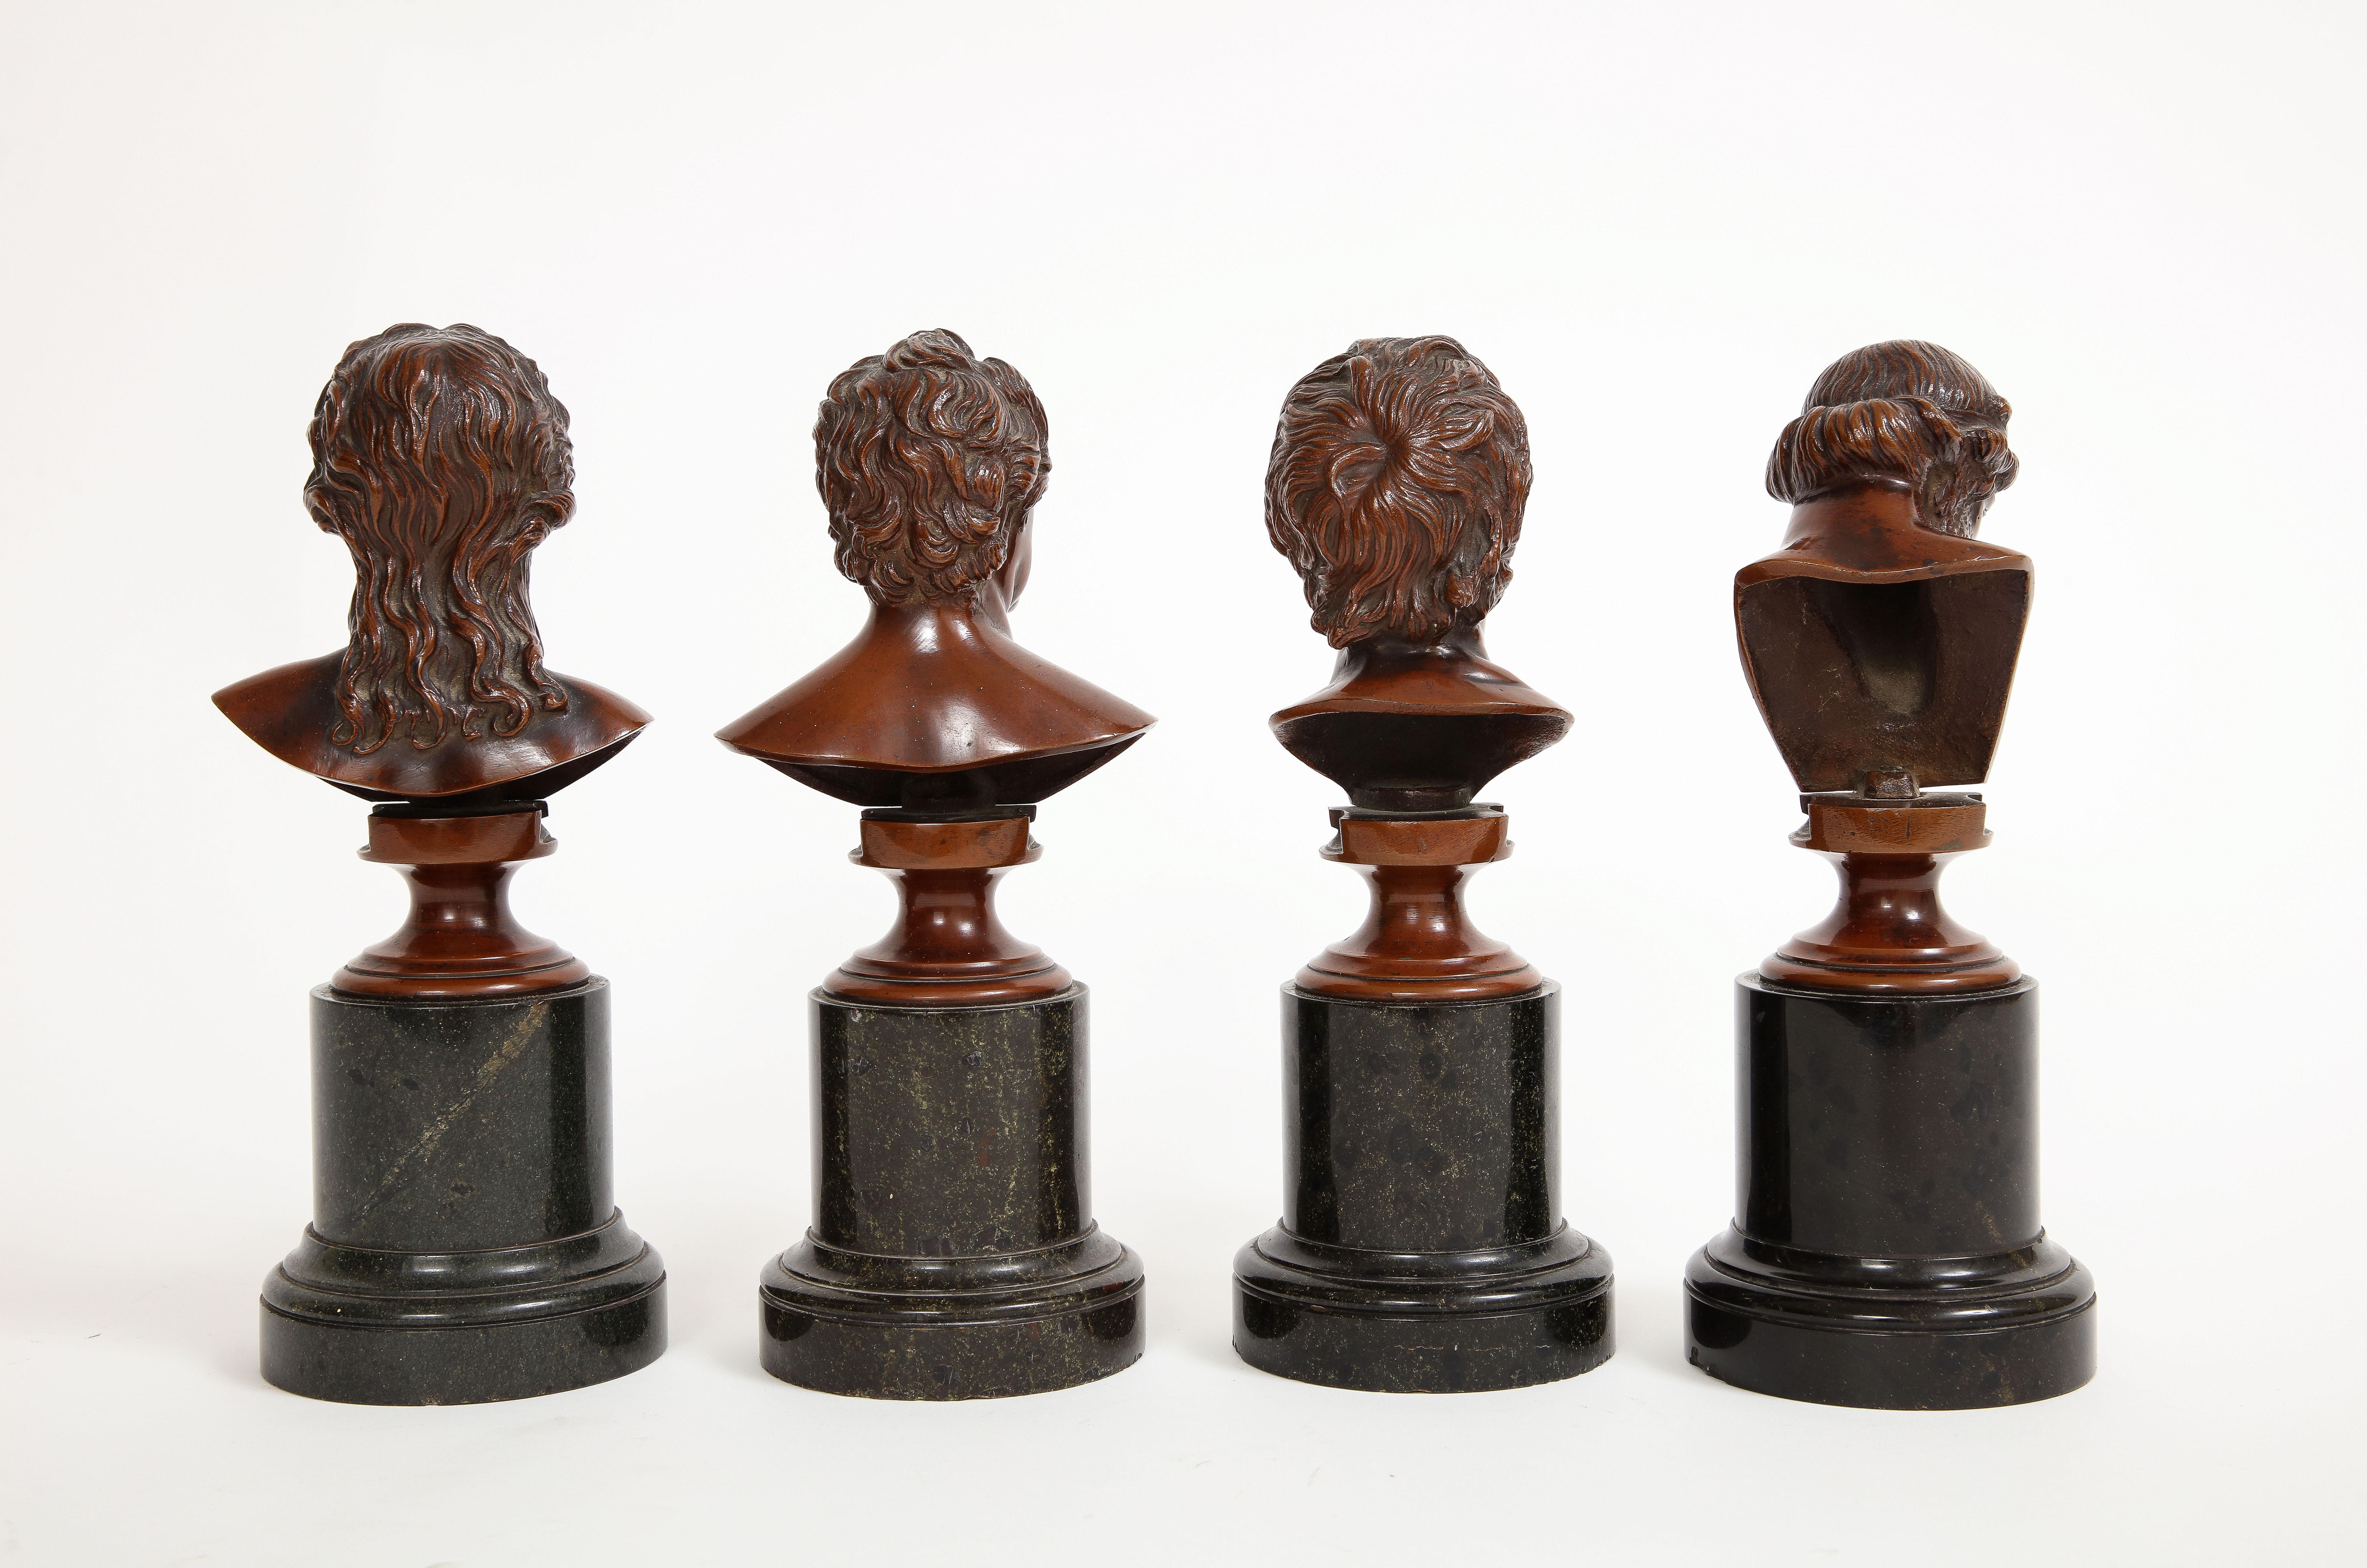 Set of 4 19th C. French Patinated Bronze Marble Mounted Busts of Philosophers For Sale 2